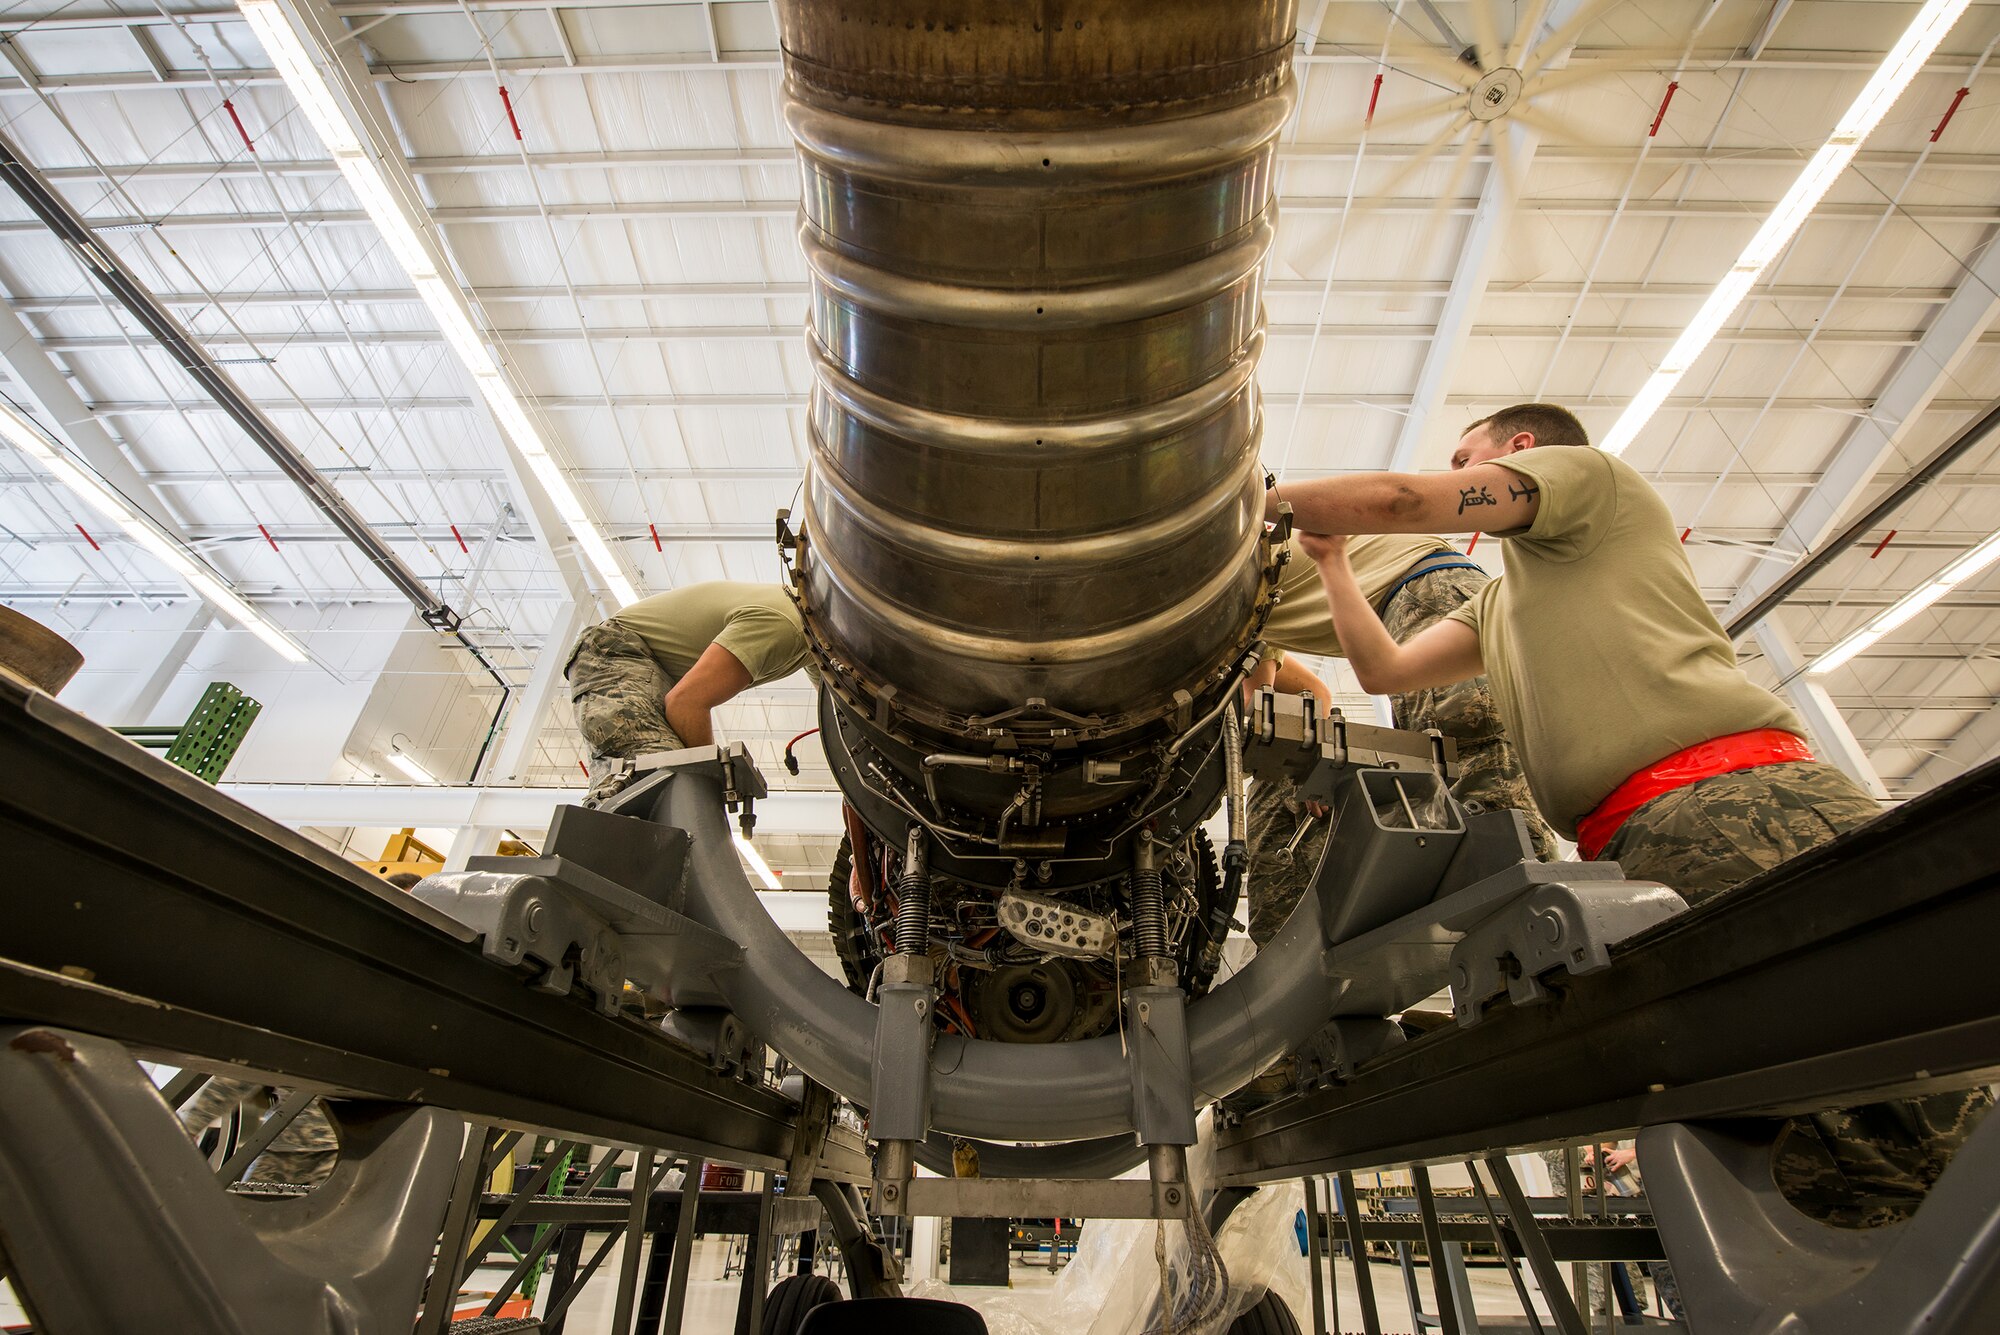 A team of Airmen from the 23d Component Maintenance Squadron rebuild an A-10C Thunderbolt II TF34 engine at Moody Air Force Base, Ga., Feb. 19, 2014. The U.S. Air Force has more than 1,050 TF34 engines in service. (U.S. Air Force photo by Airman 1st Class Ryan Callaghan/Released)